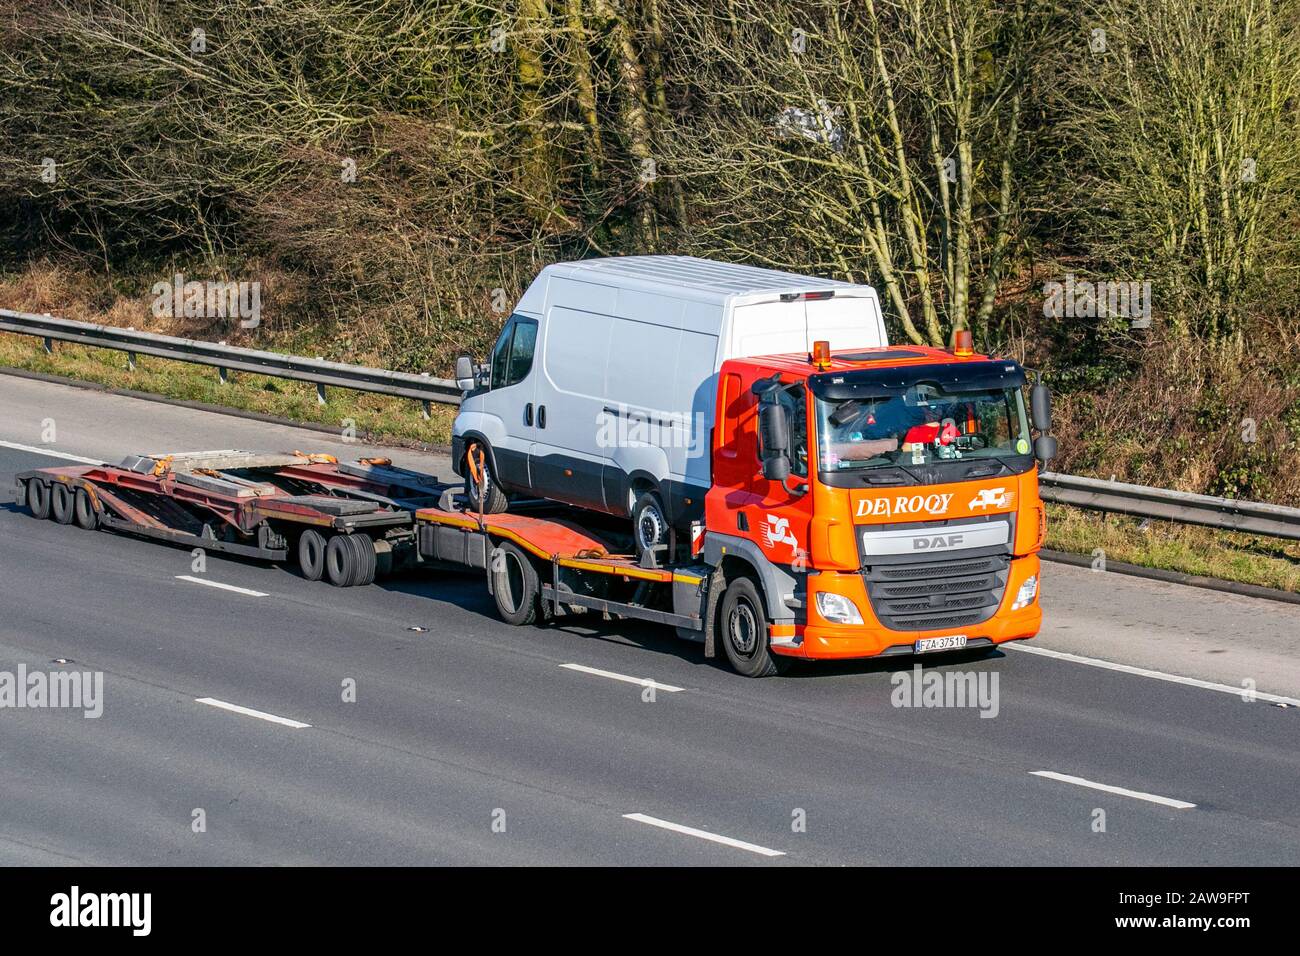 De Rooy Leyland Haulage delivery trucks, lorry, transportation, truck, cargo carrier, DAF vehicle, European commercial transport, industry, M61 at Manchester, UK Stock Photo